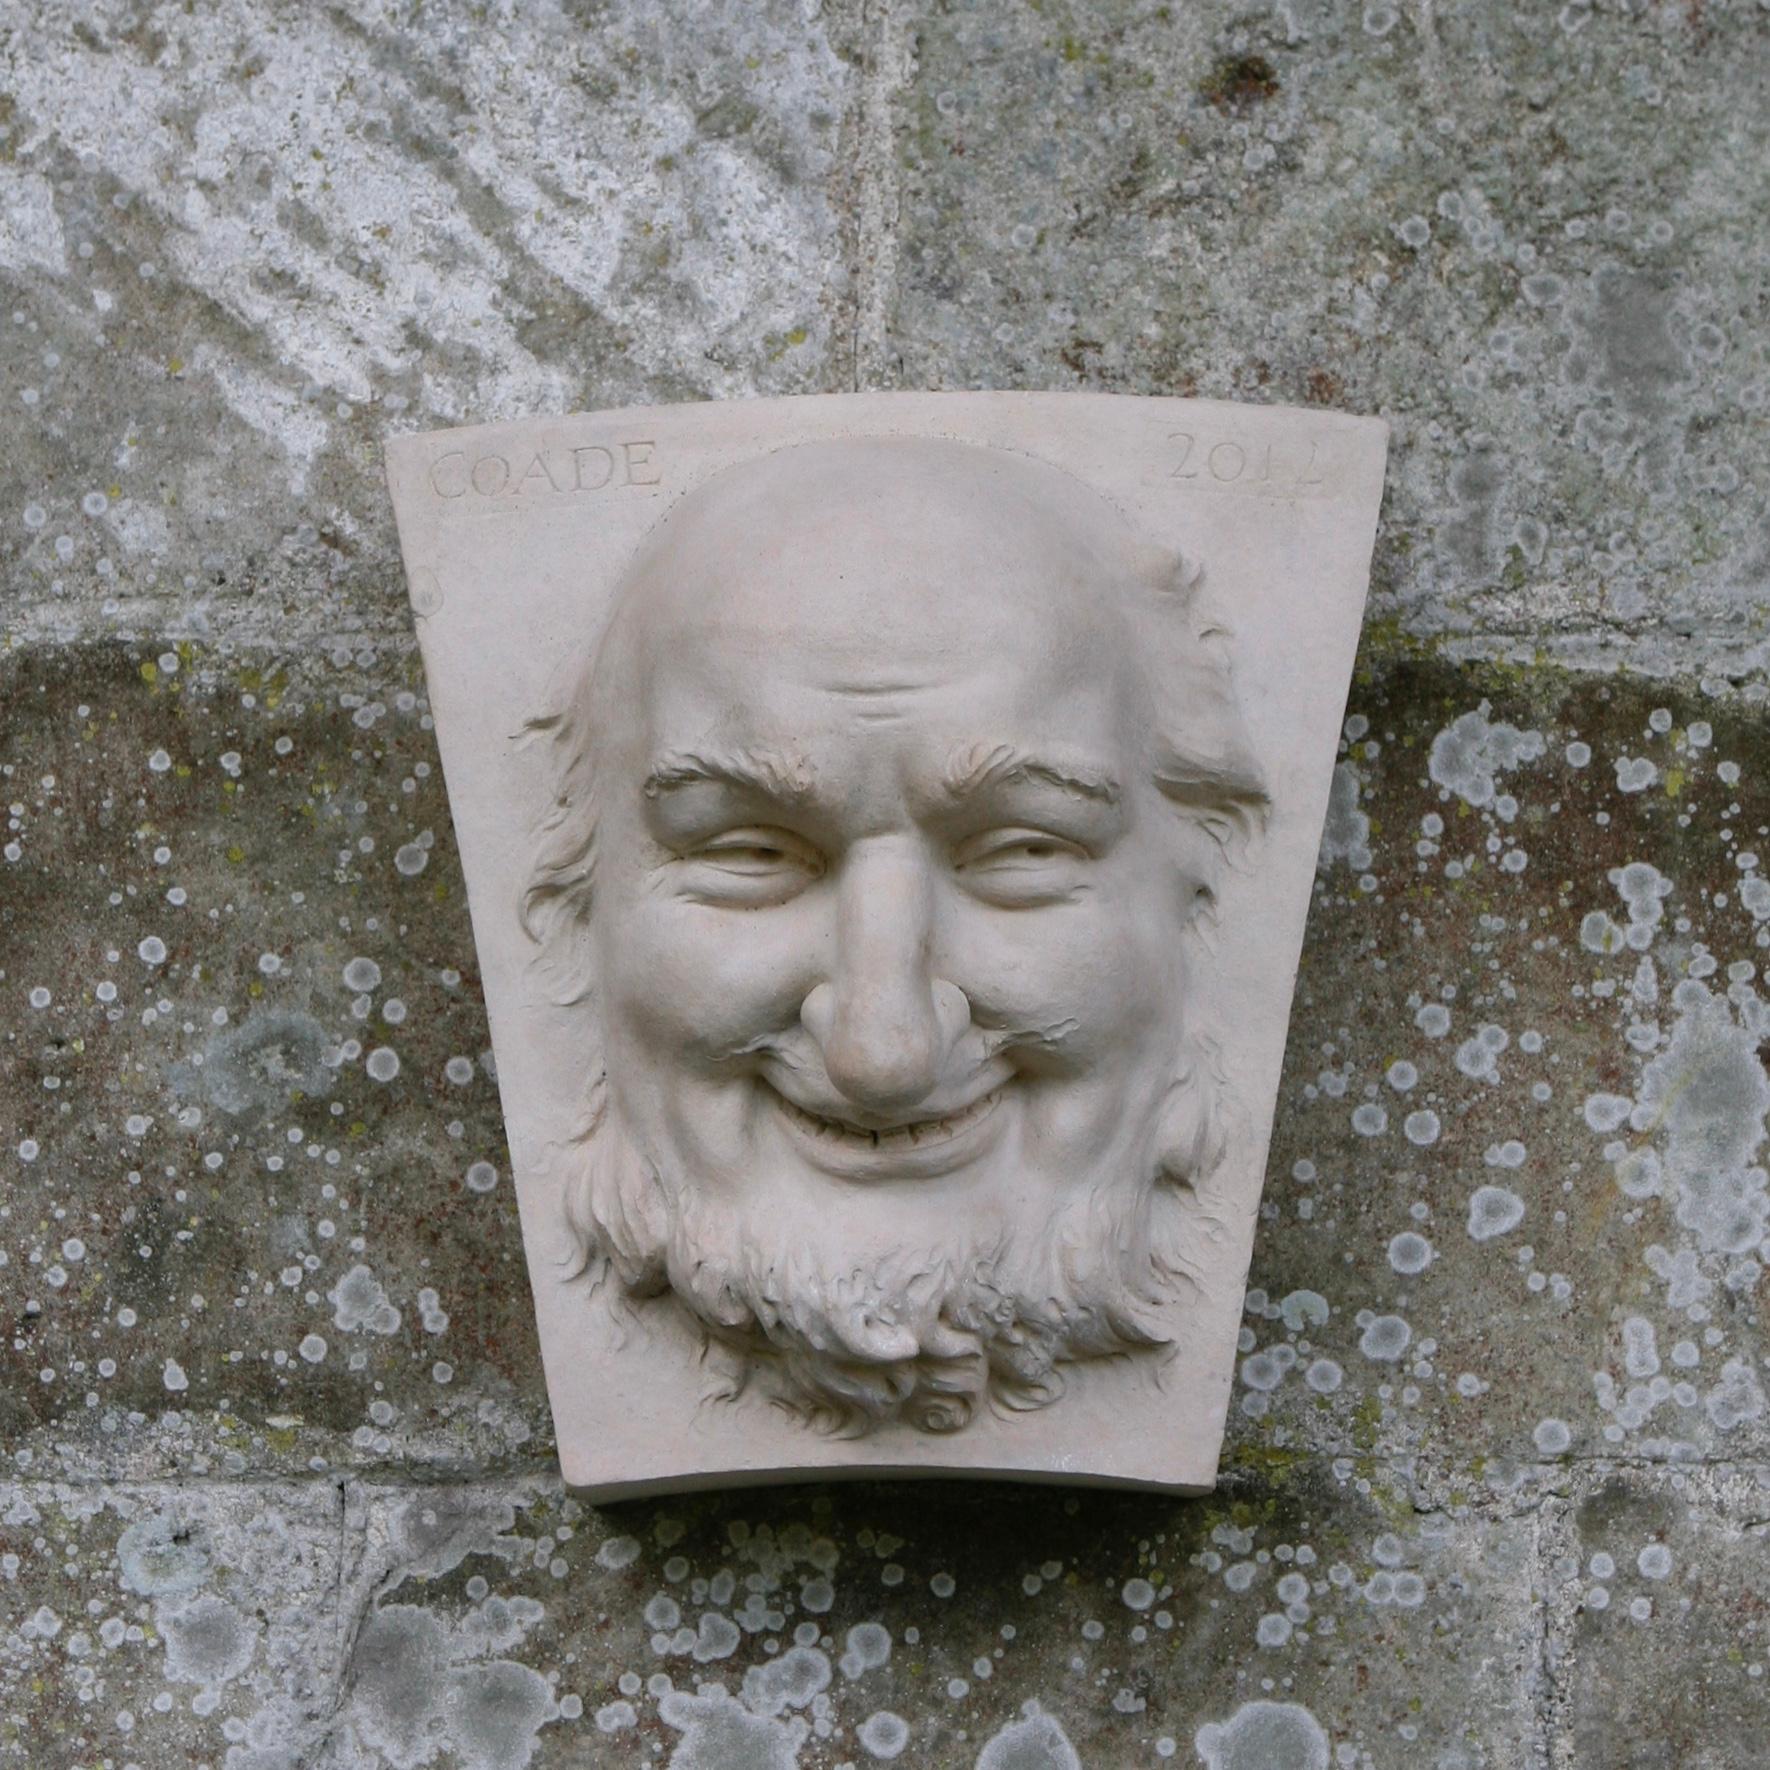 This keystone featuring a male head is a reproduction based on an original 18th-century Coade keystone.
The original keystone was purportedly inspired by the character of Harpagon from the play "The Miser," a comedic work in five acts written by the